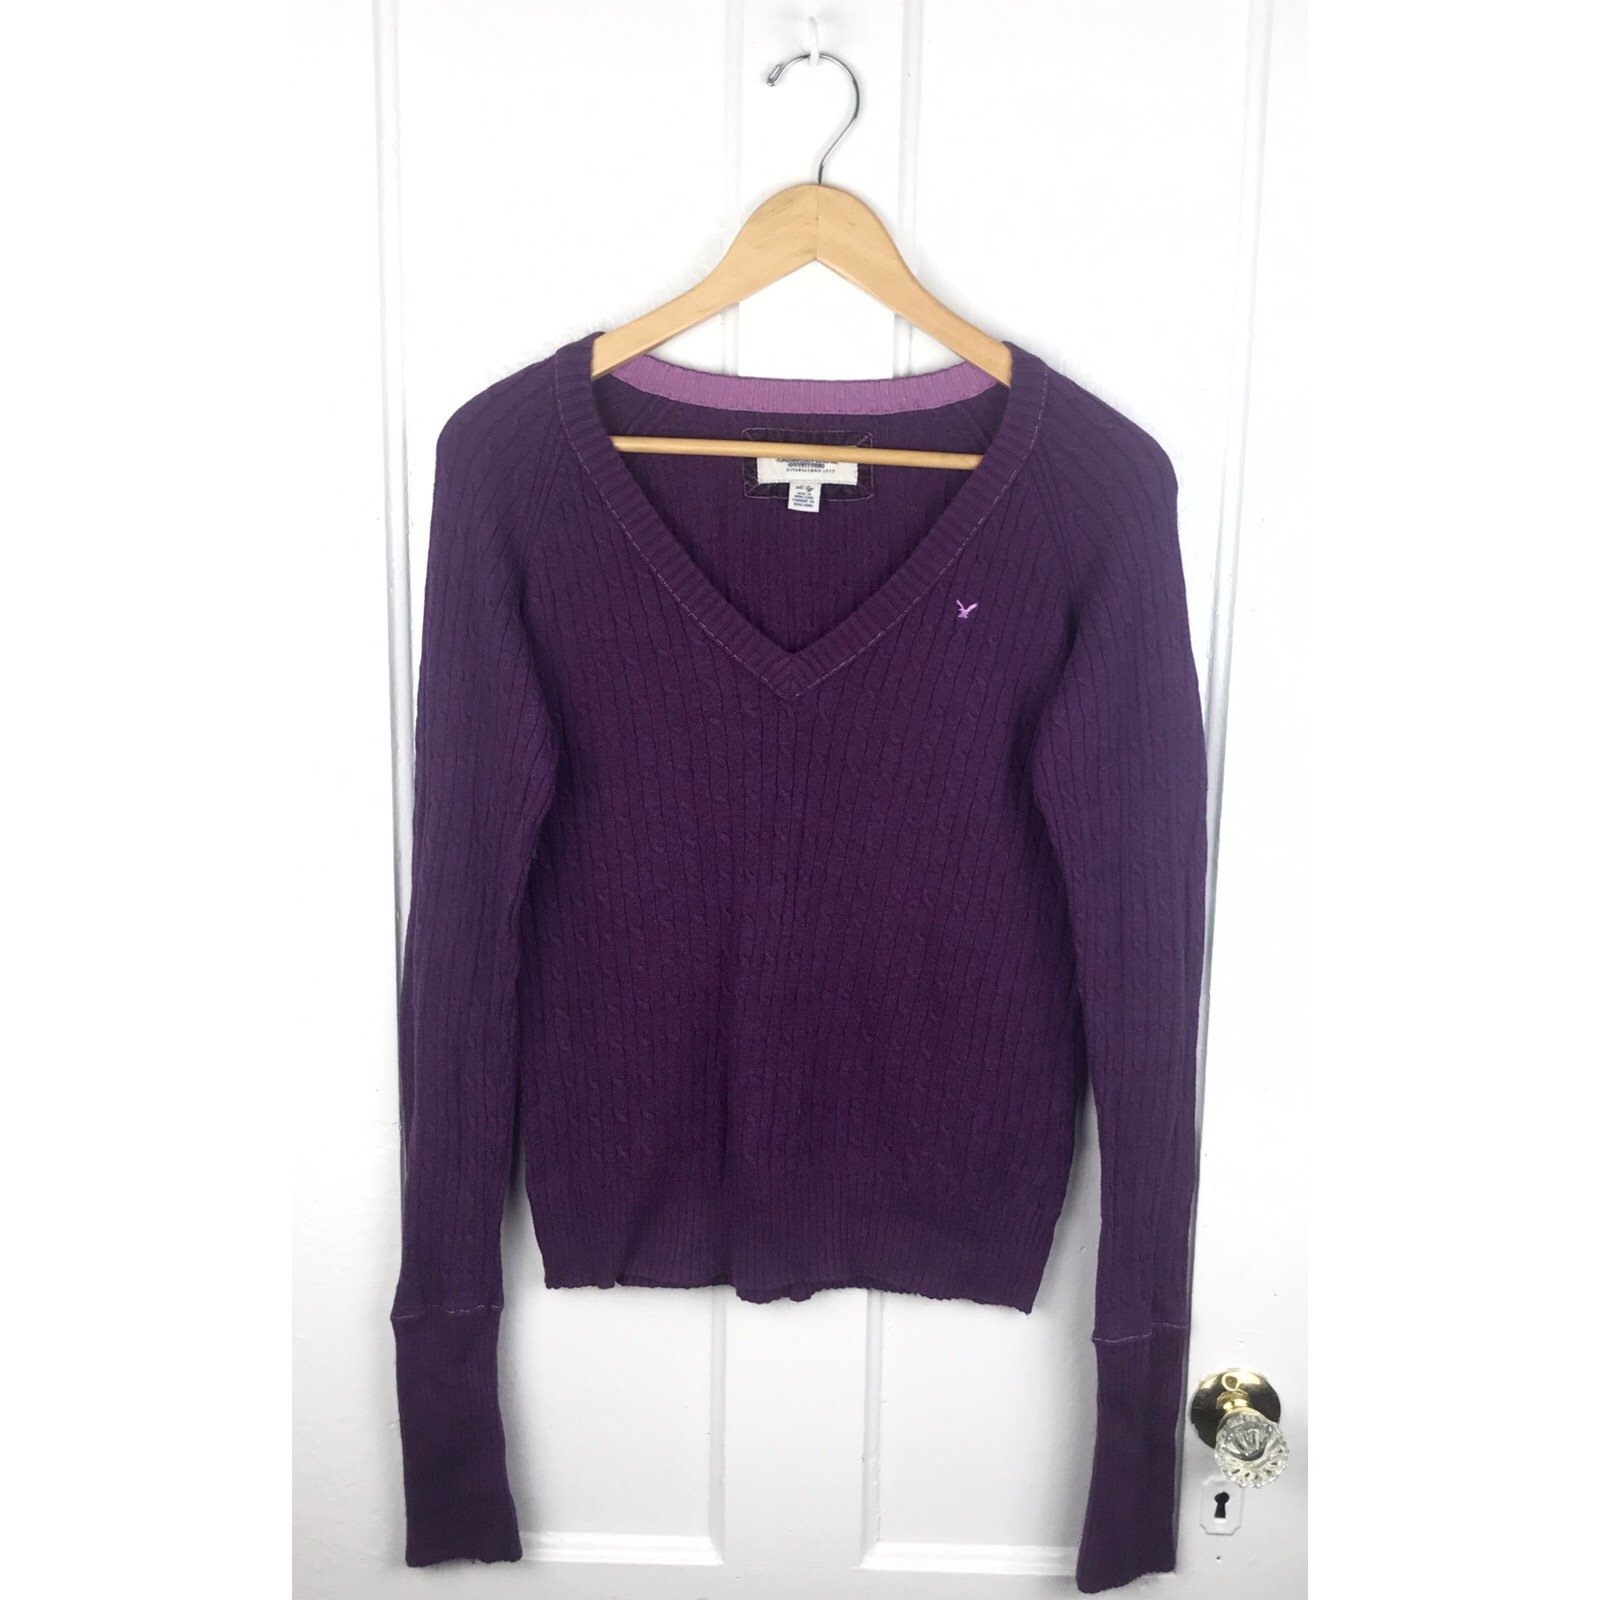 Factory Direct  American Eagle Outfitters size L purple long sleeve v-neck cable-knit sweater iPhRvP86O Low Price